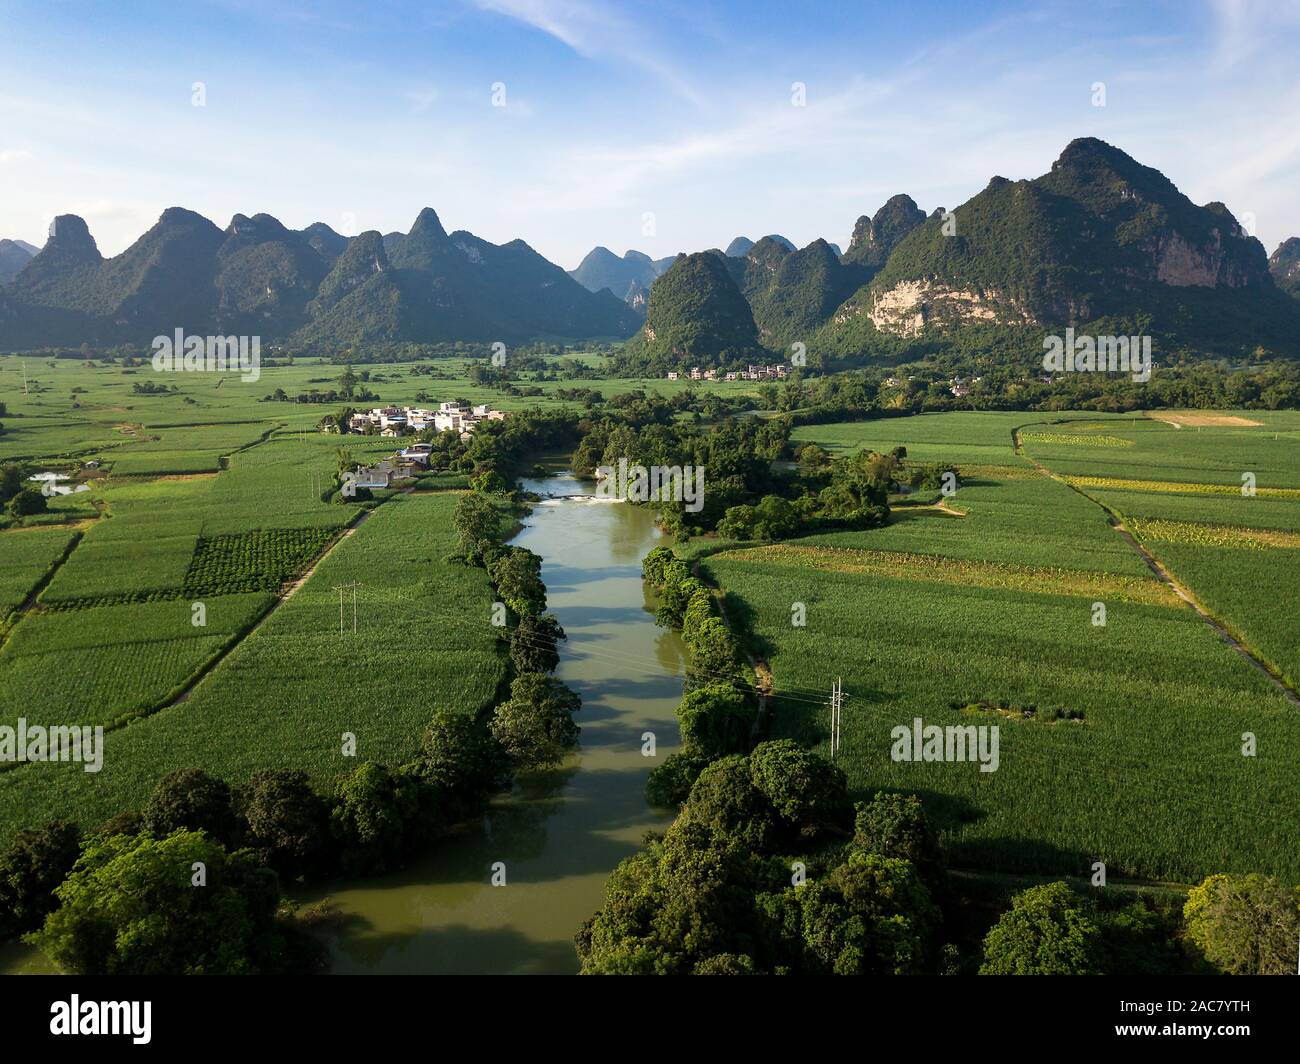 Karst landscape and agricultural fields in Guangxi province at south China aerial view Stock Photo